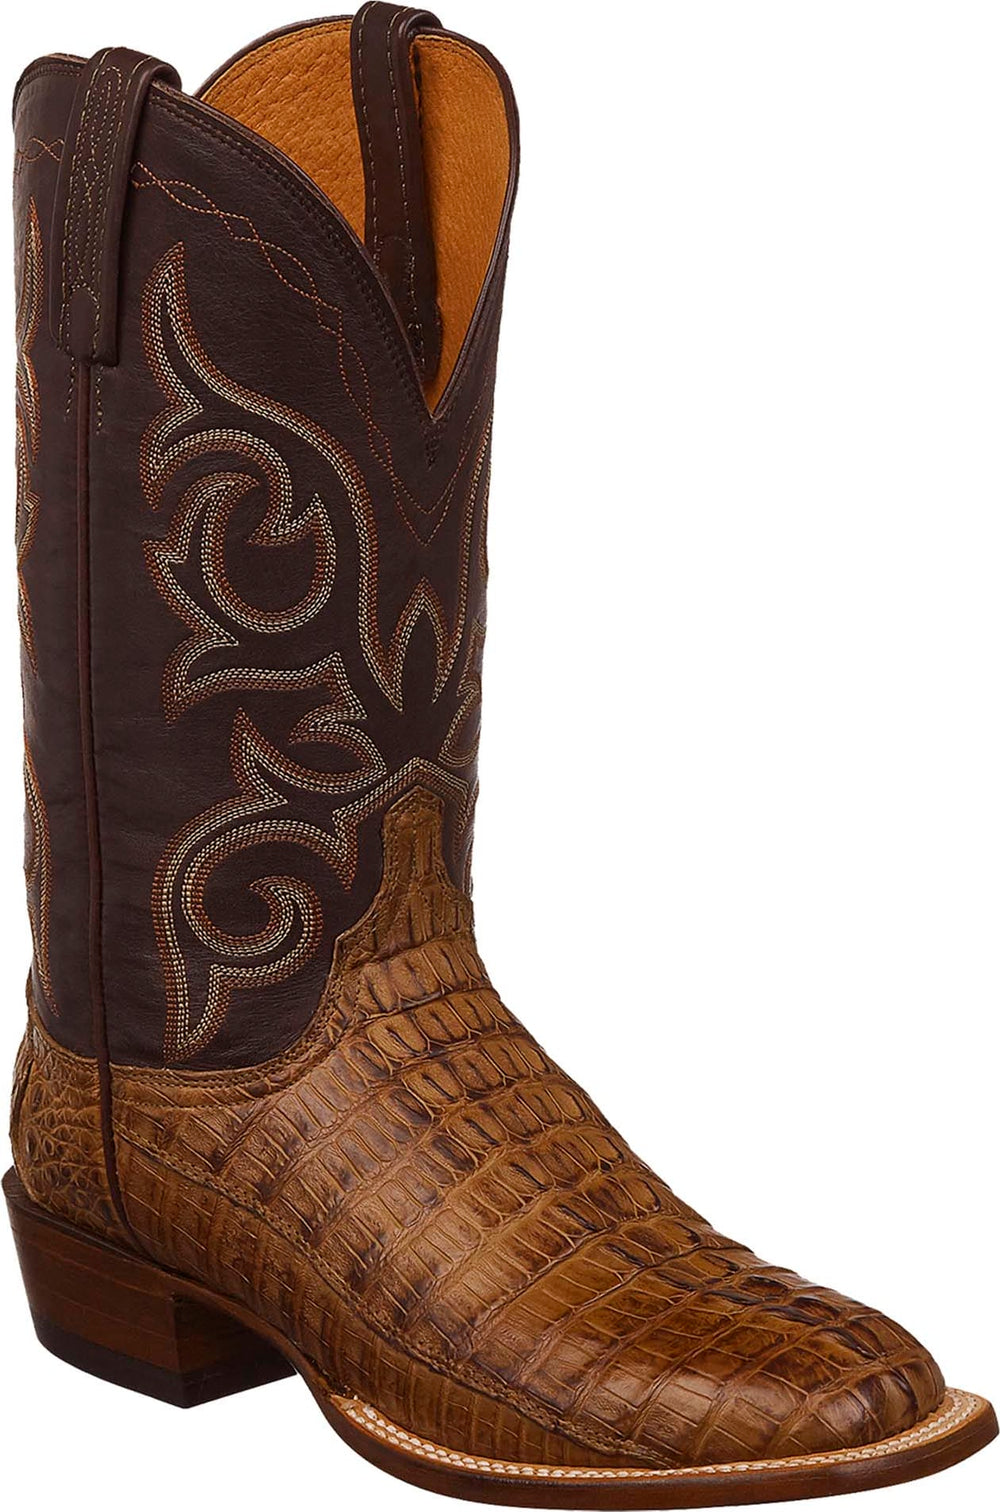 MEN’S LUCCHESE HAAN - TAN BURNISHED HBK TAIL BOOTS - El Toro Boots